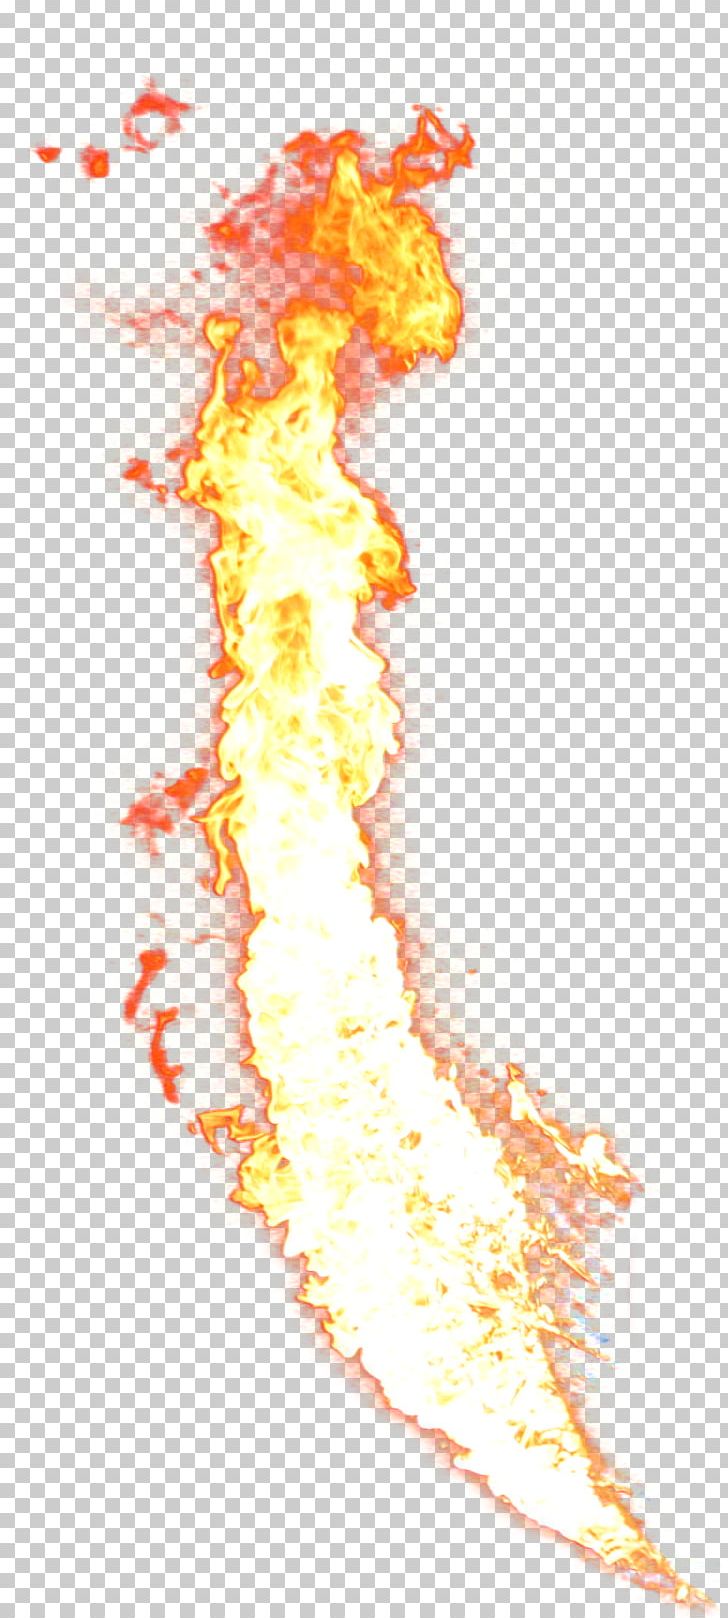 Flame Combustion Fire Euclidean PNG, Clipart, Art, Blue Flame, Candle Flame, Combustion, Cool Free PNG Download